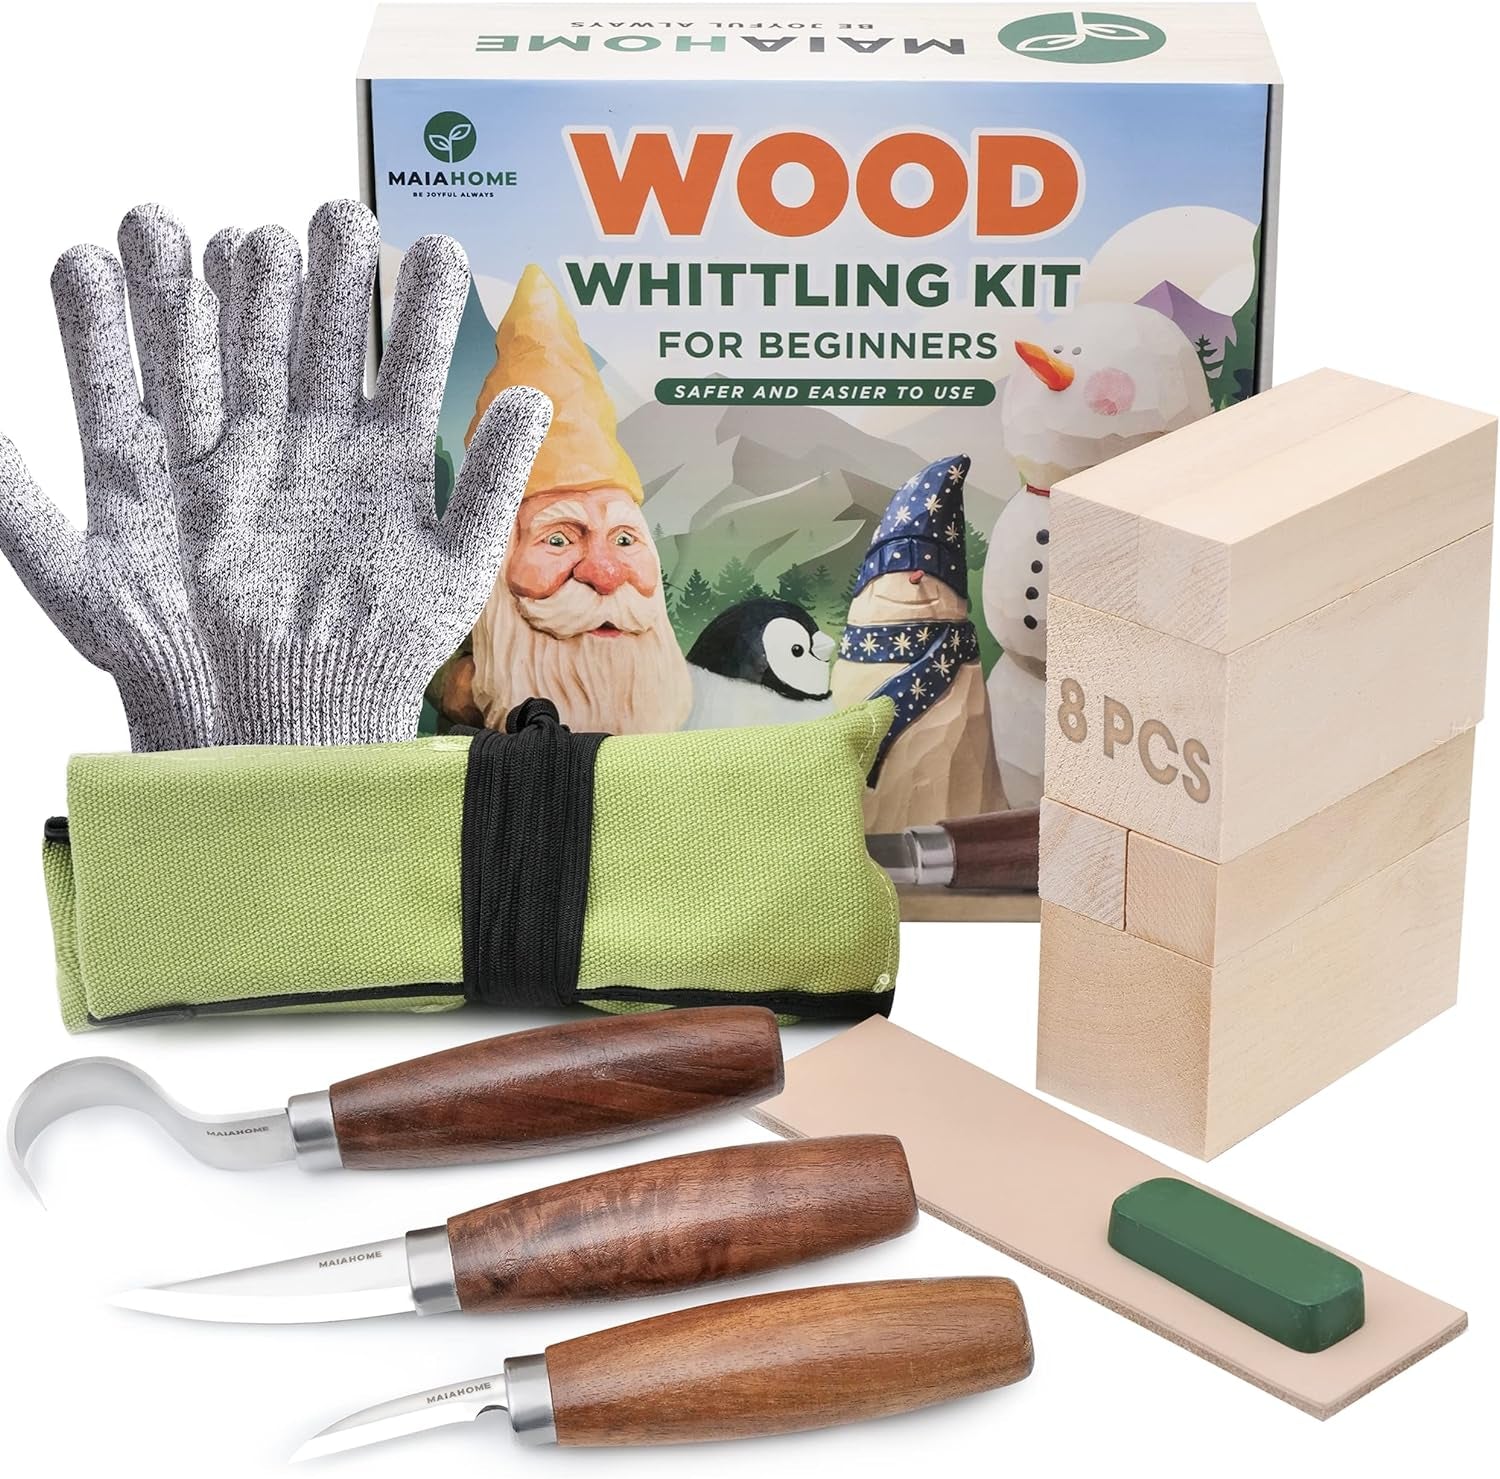 Whittling Kit for Beginners Includes 8-Basswood Wood Carving